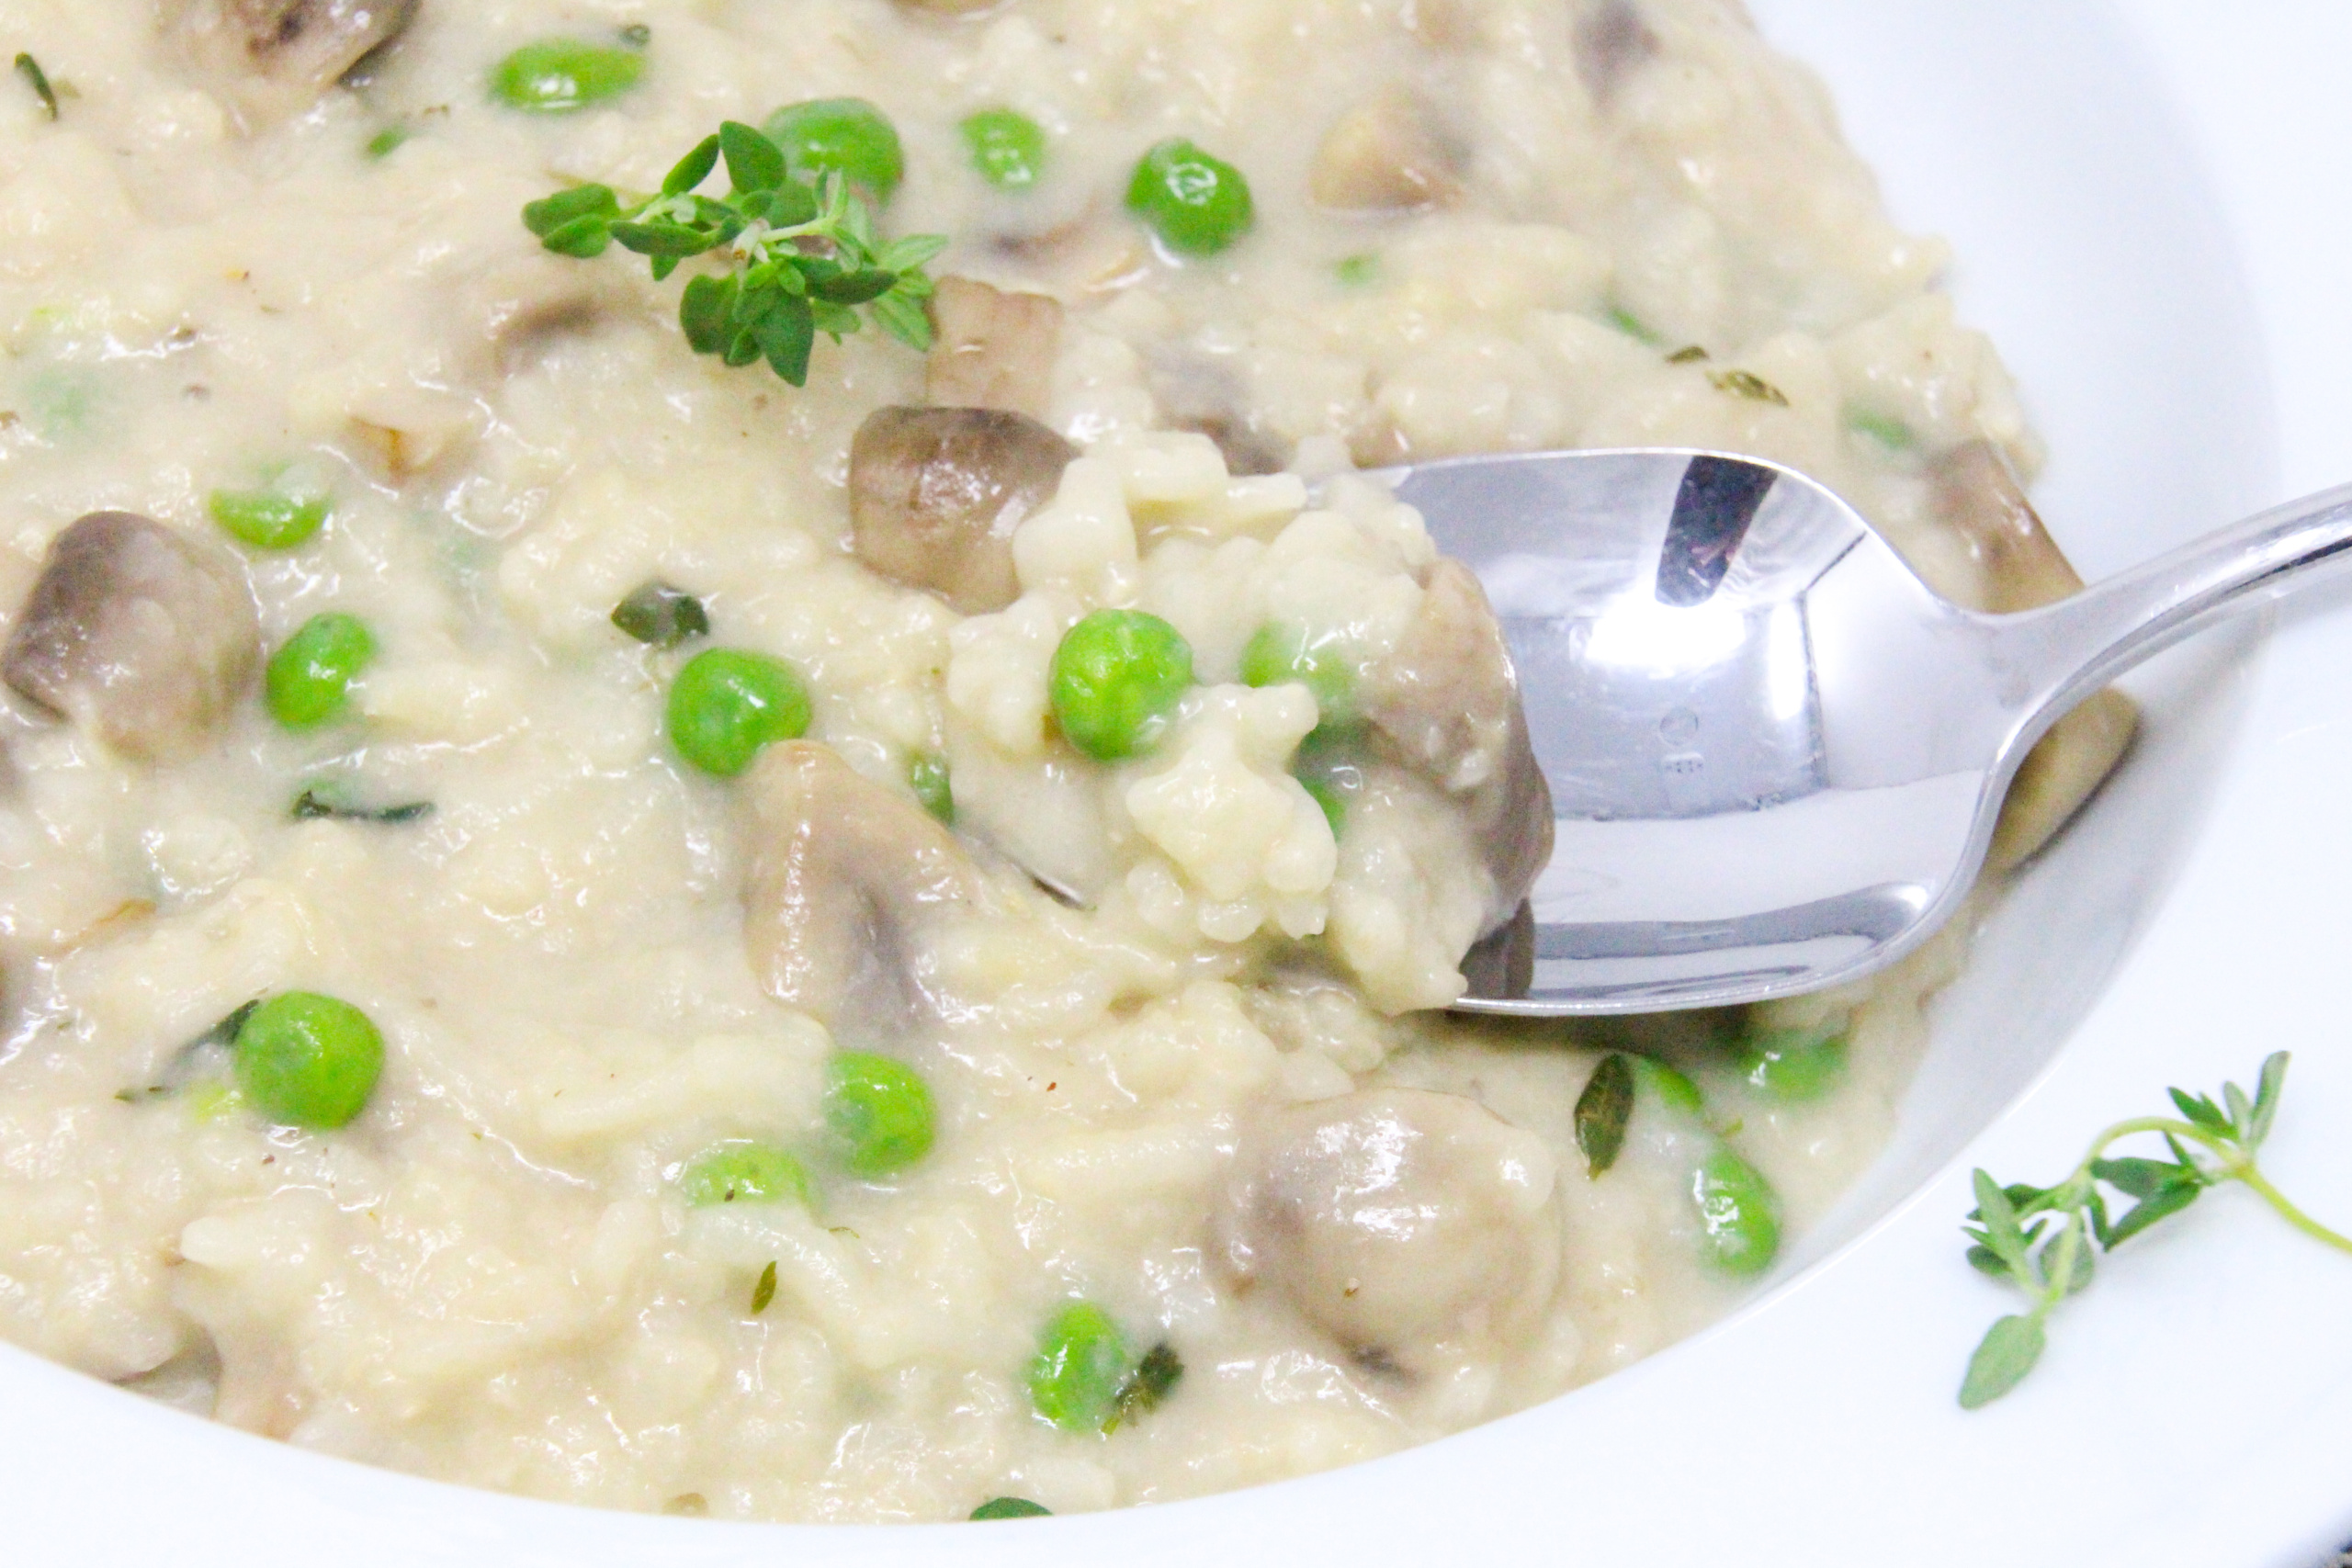 Risotto with Chanterelles and Peas is a delicious combination of flavors! While risotto can be labor intensive, the author offers some tips for prepping ahead of time, then finishing the dish ten minutes before dinner. Recipe shared with permission granted by Leslie Karst, author of A SENSE FOR MURDER. 